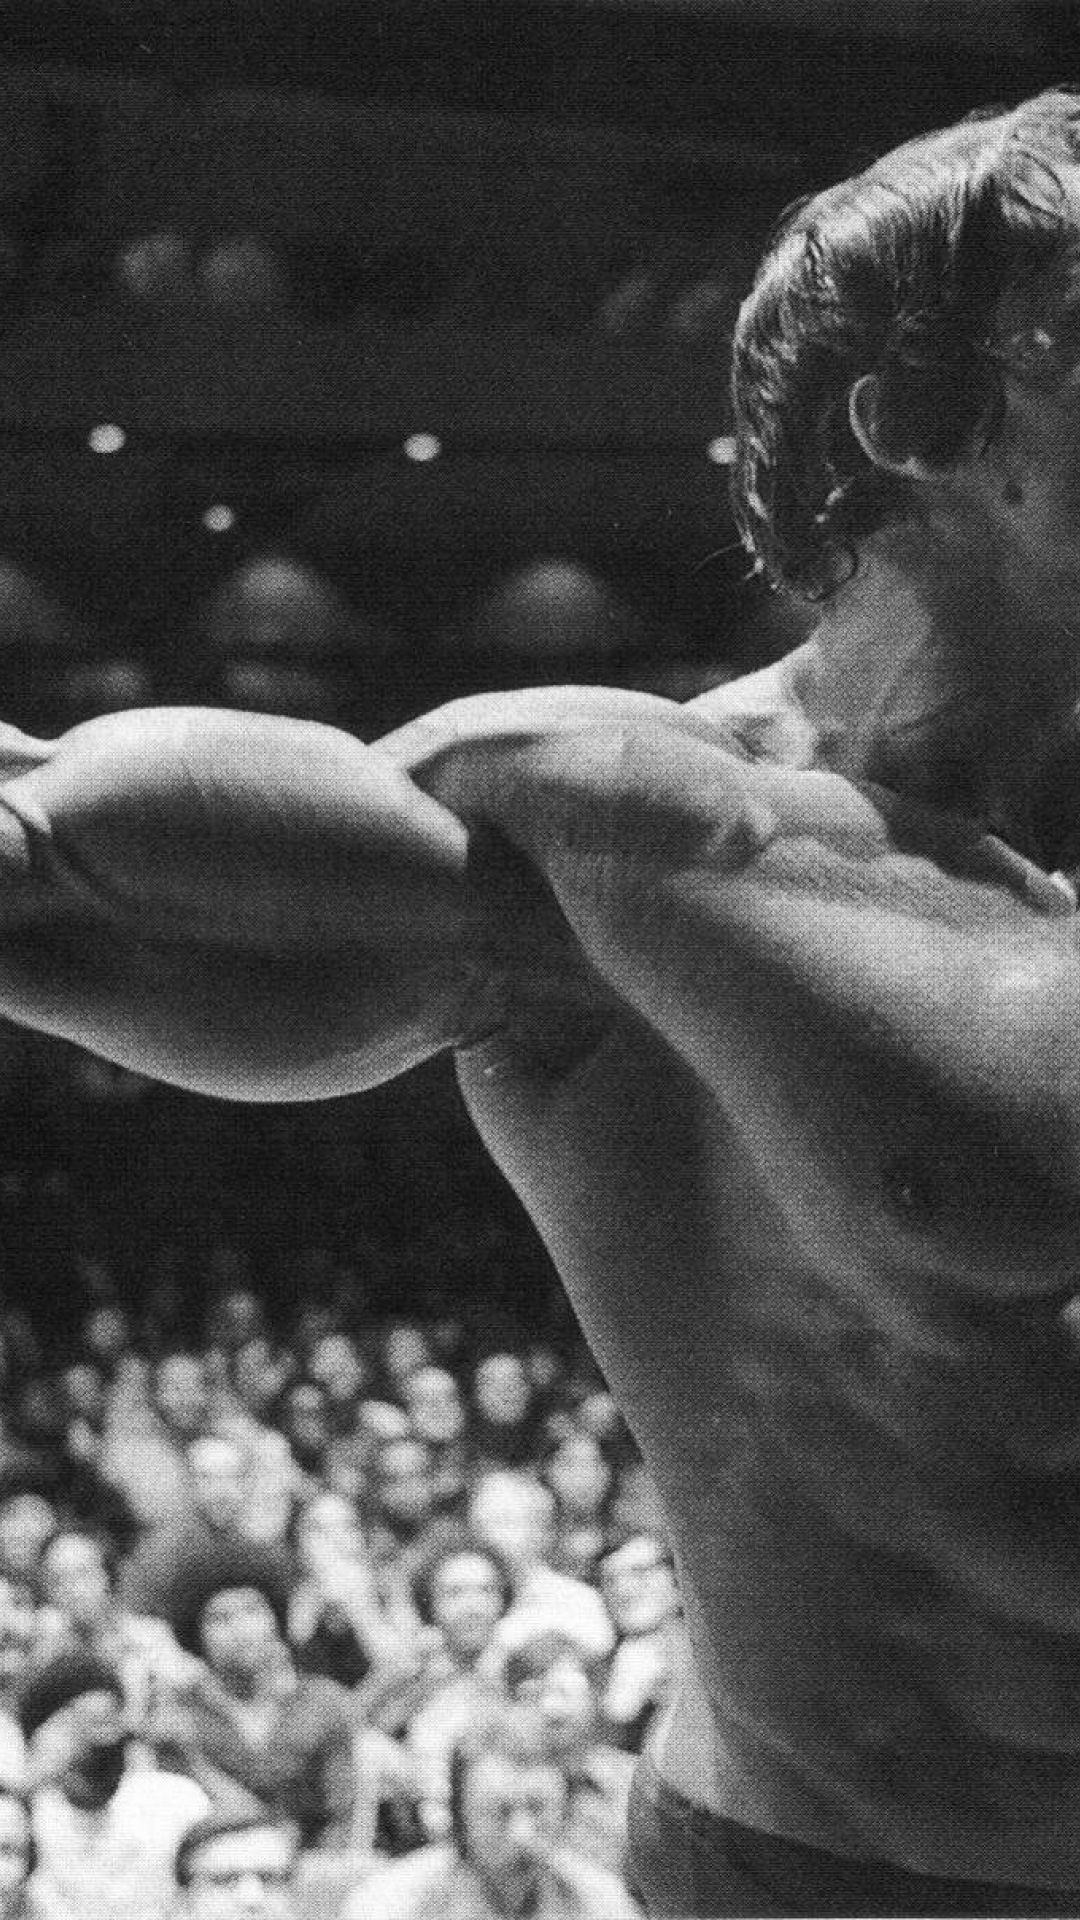 Arnold Schwarzenegger Bodybuilding Poster iPhone 6s, 6 Plus and Pixel XL , One Plus 3t, 5 Wallpaper, HD Celebrities 4K Wallpaper, Image, Photo and Background